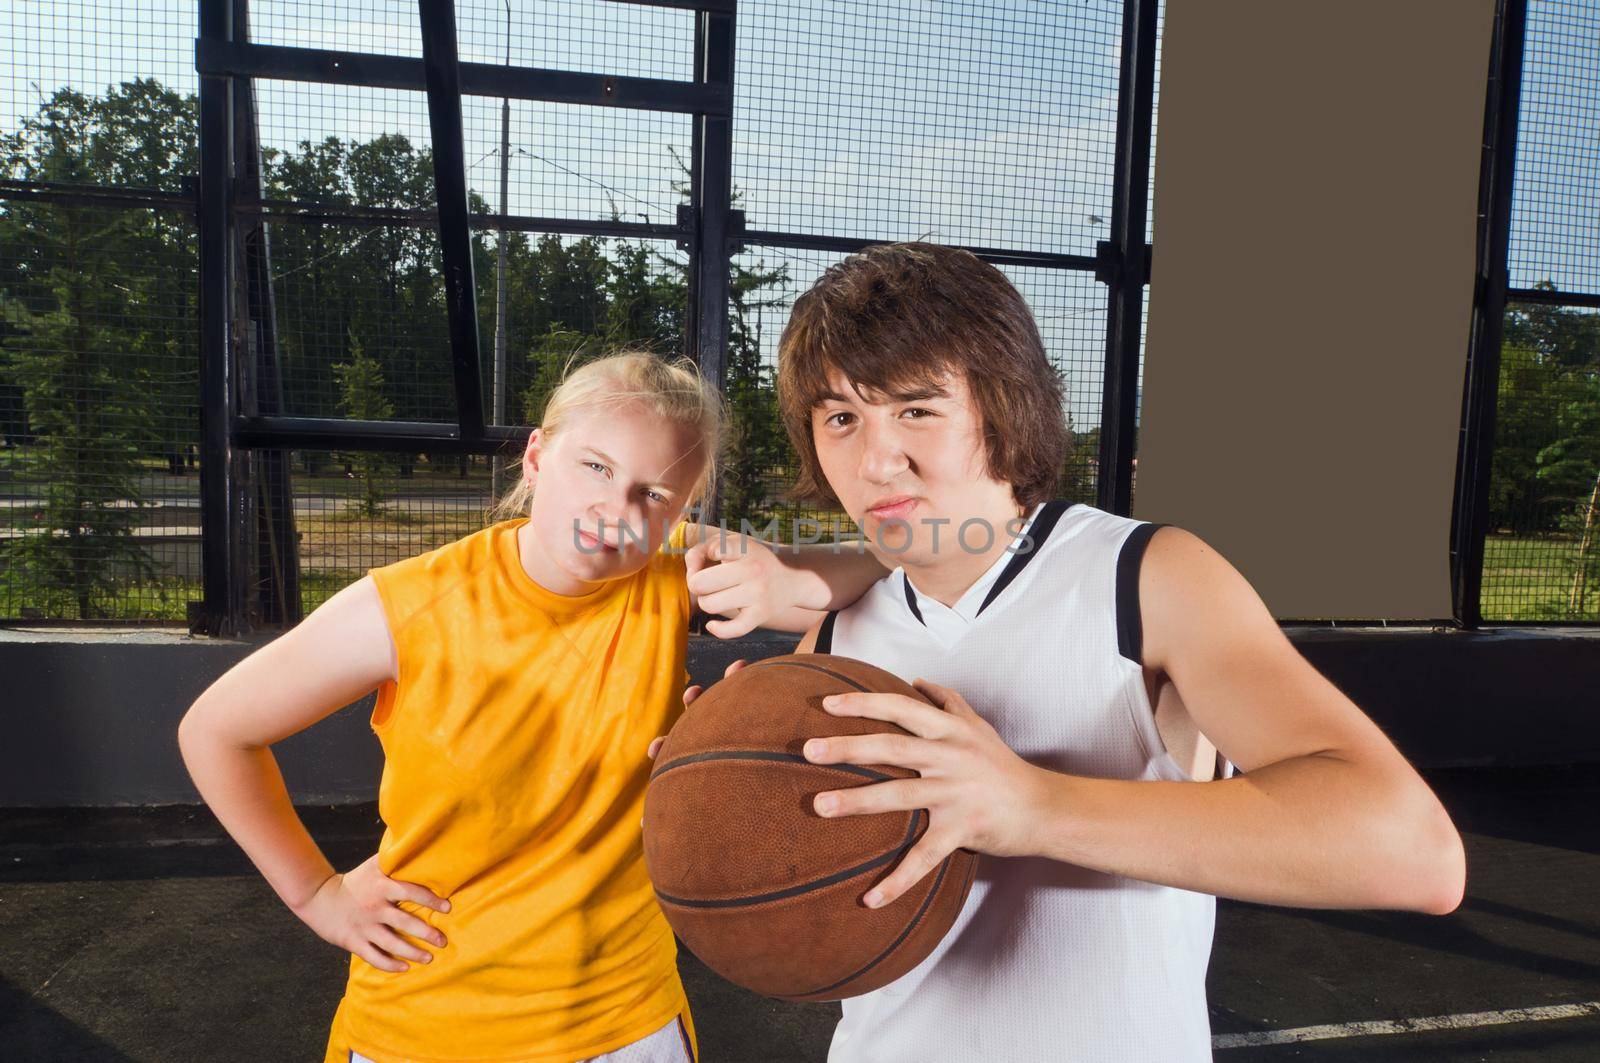 Two teenage basketball players posing at the outdoor playground